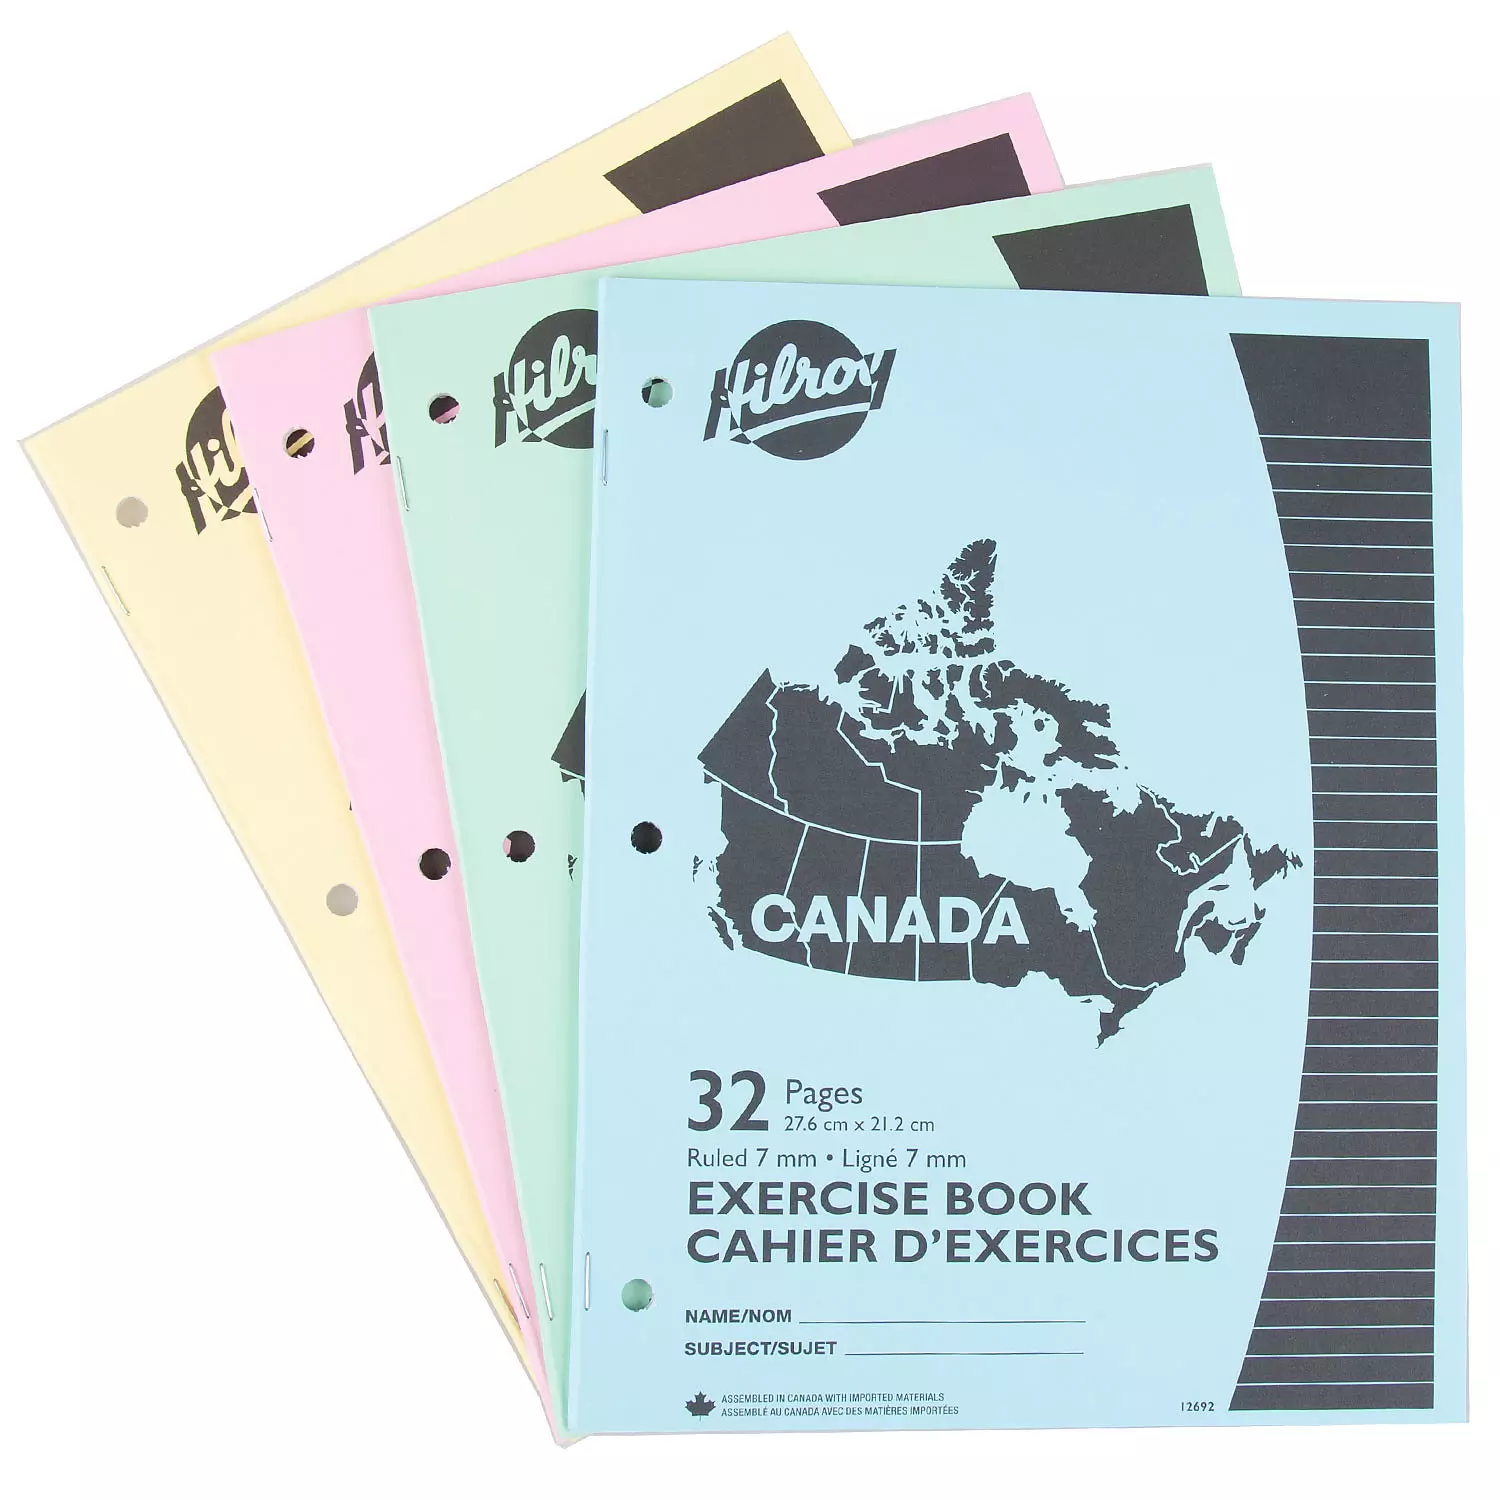 Hilroy - Exercise books, 32 pages, ruled 7 mm, pk. of 4